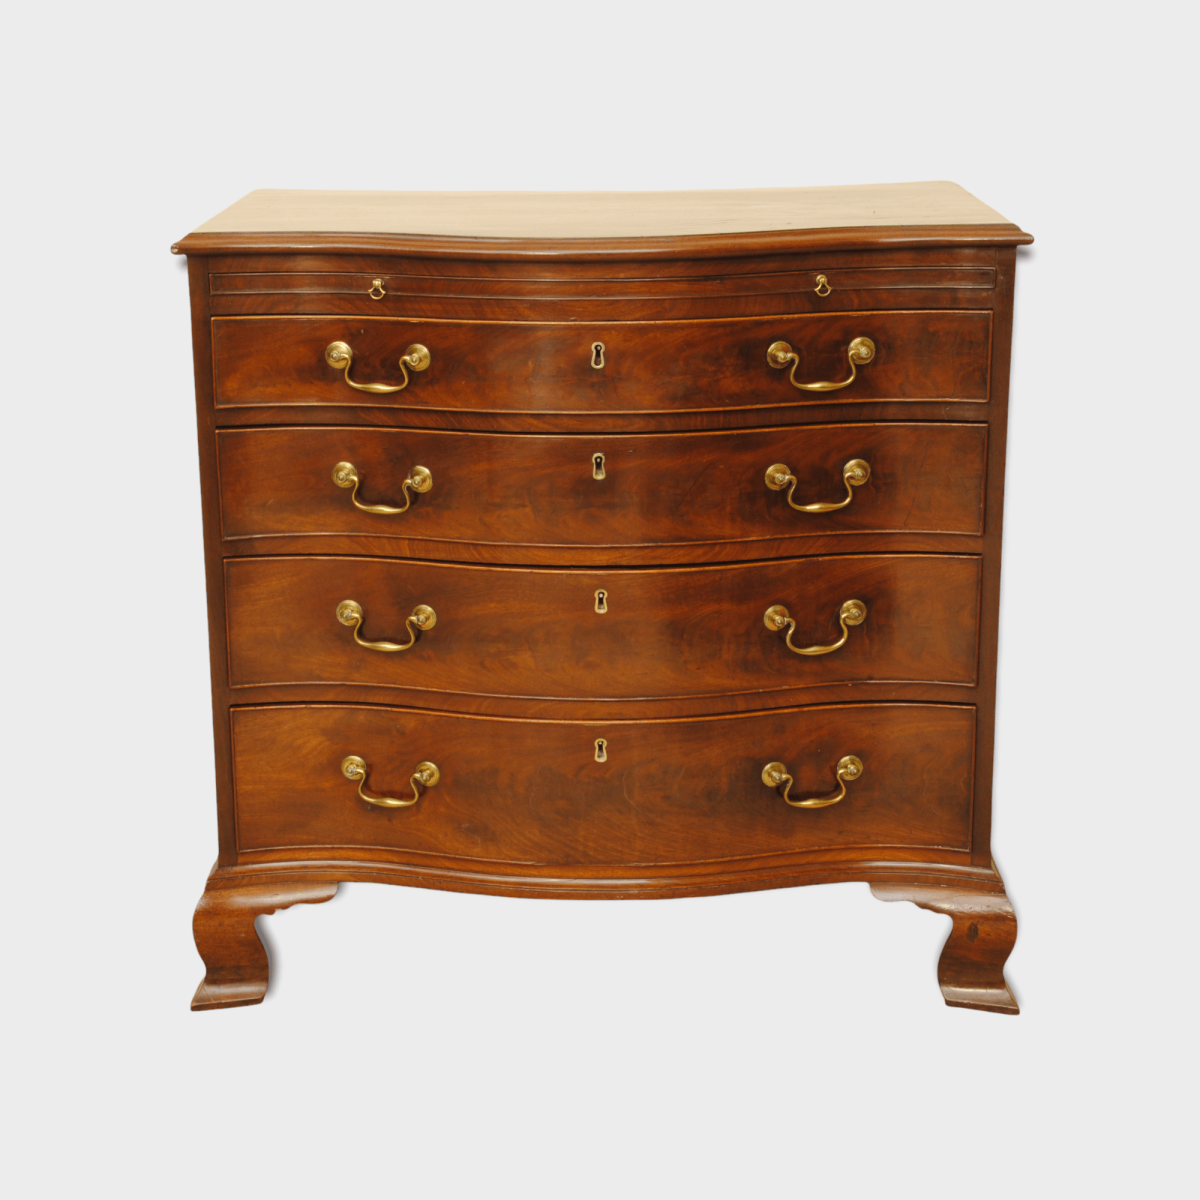 A Fine And Small 18th Century Serpentine Chest Of Drawers